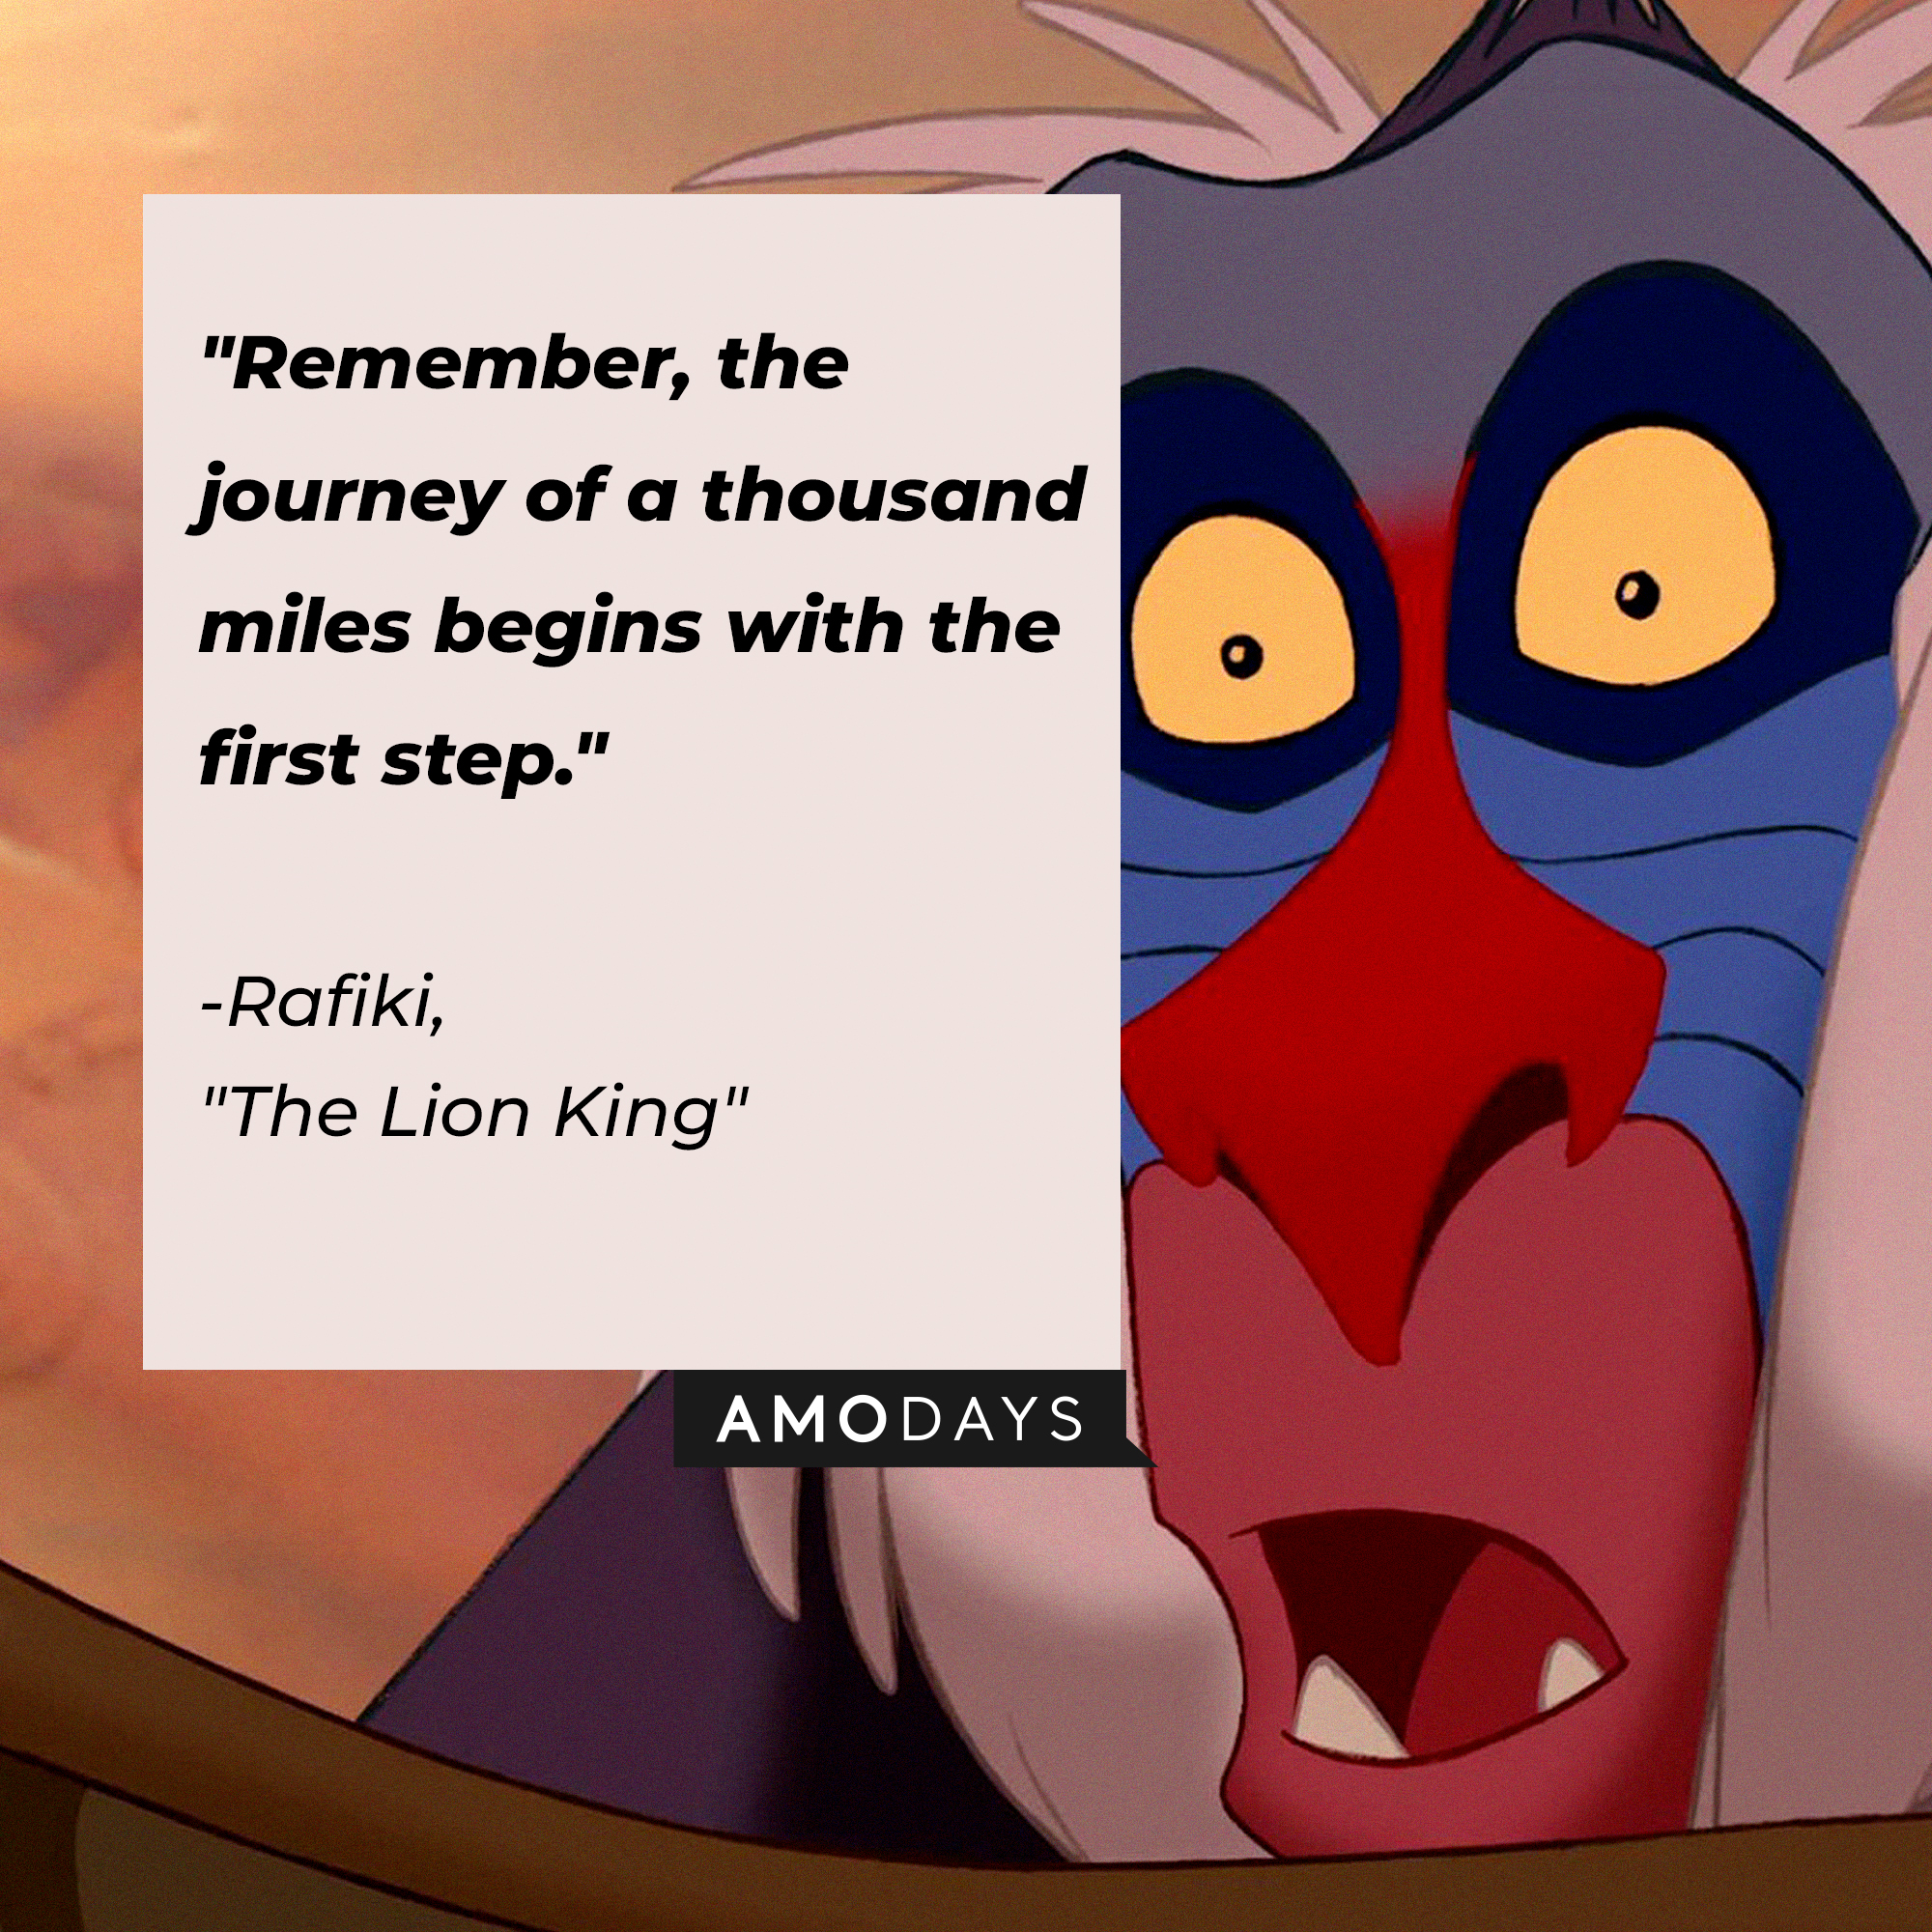 Rafiki with his quote: "Remember, the journey of a thousand miles begins with the first step." | Source: Facebook.com/DisneyTheLionKing